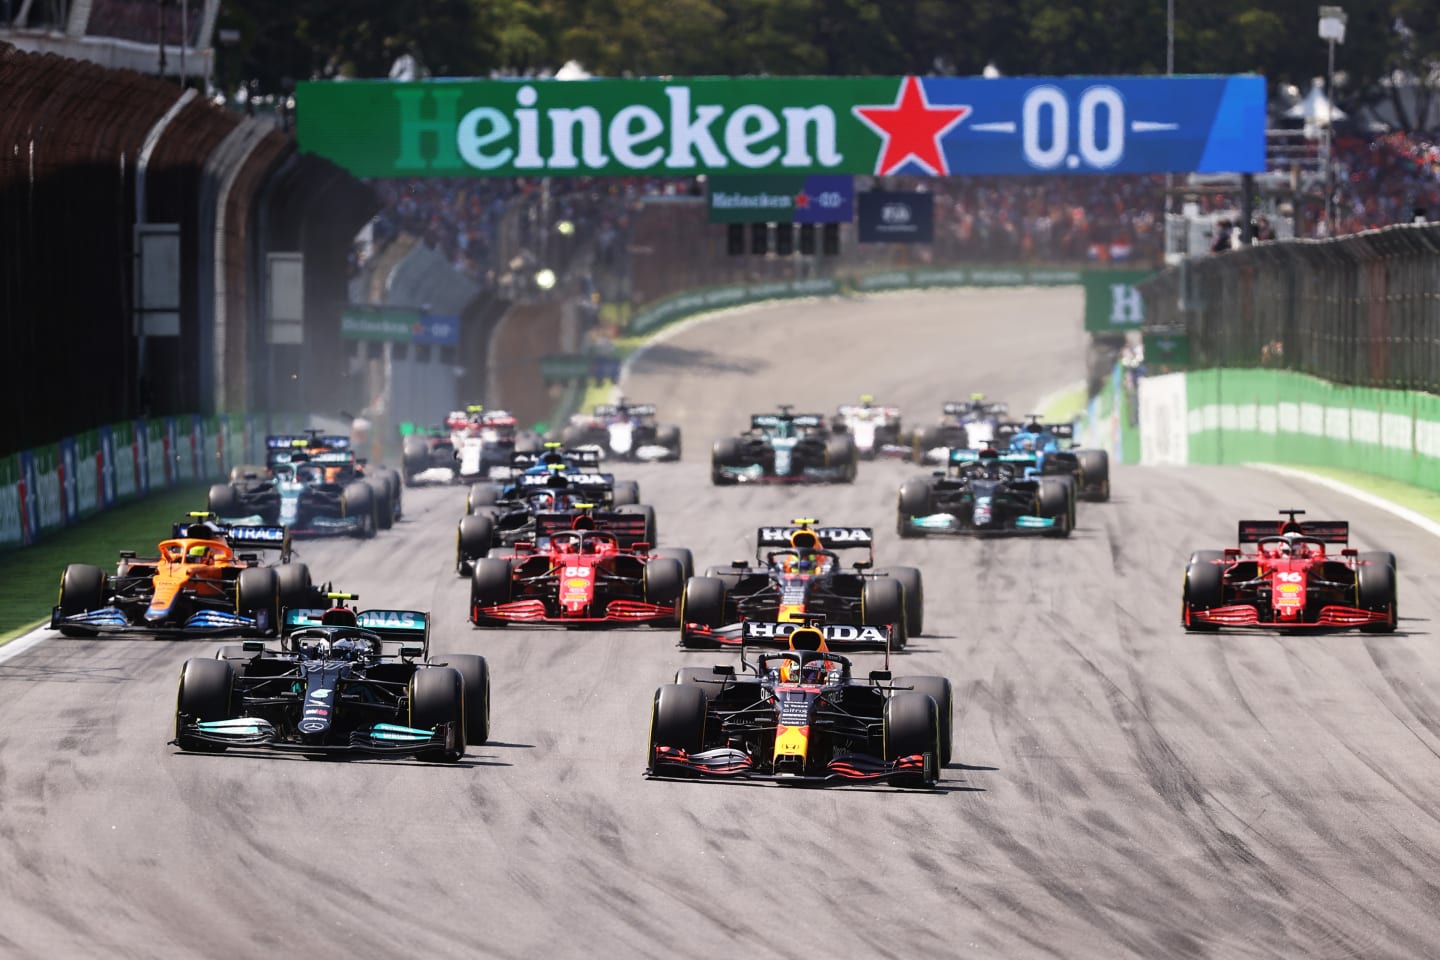 SAO PAULO, BRAZIL - NOVEMBER 14: Max Verstappen of the Netherlands driving the (33) Red Bull Racing RB16B Honda and Valtteri Bottas of Finland driving the (77) Mercedes AMG Petronas F1 Team Mercedes W12 lead the field into turn one at the start during the F1 Grand Prix of Brazil at Autodromo Jose Carlos Pace on November 14, 2021 in Sao Paulo, Brazil. (Photo by Lars Baron/Getty Images)